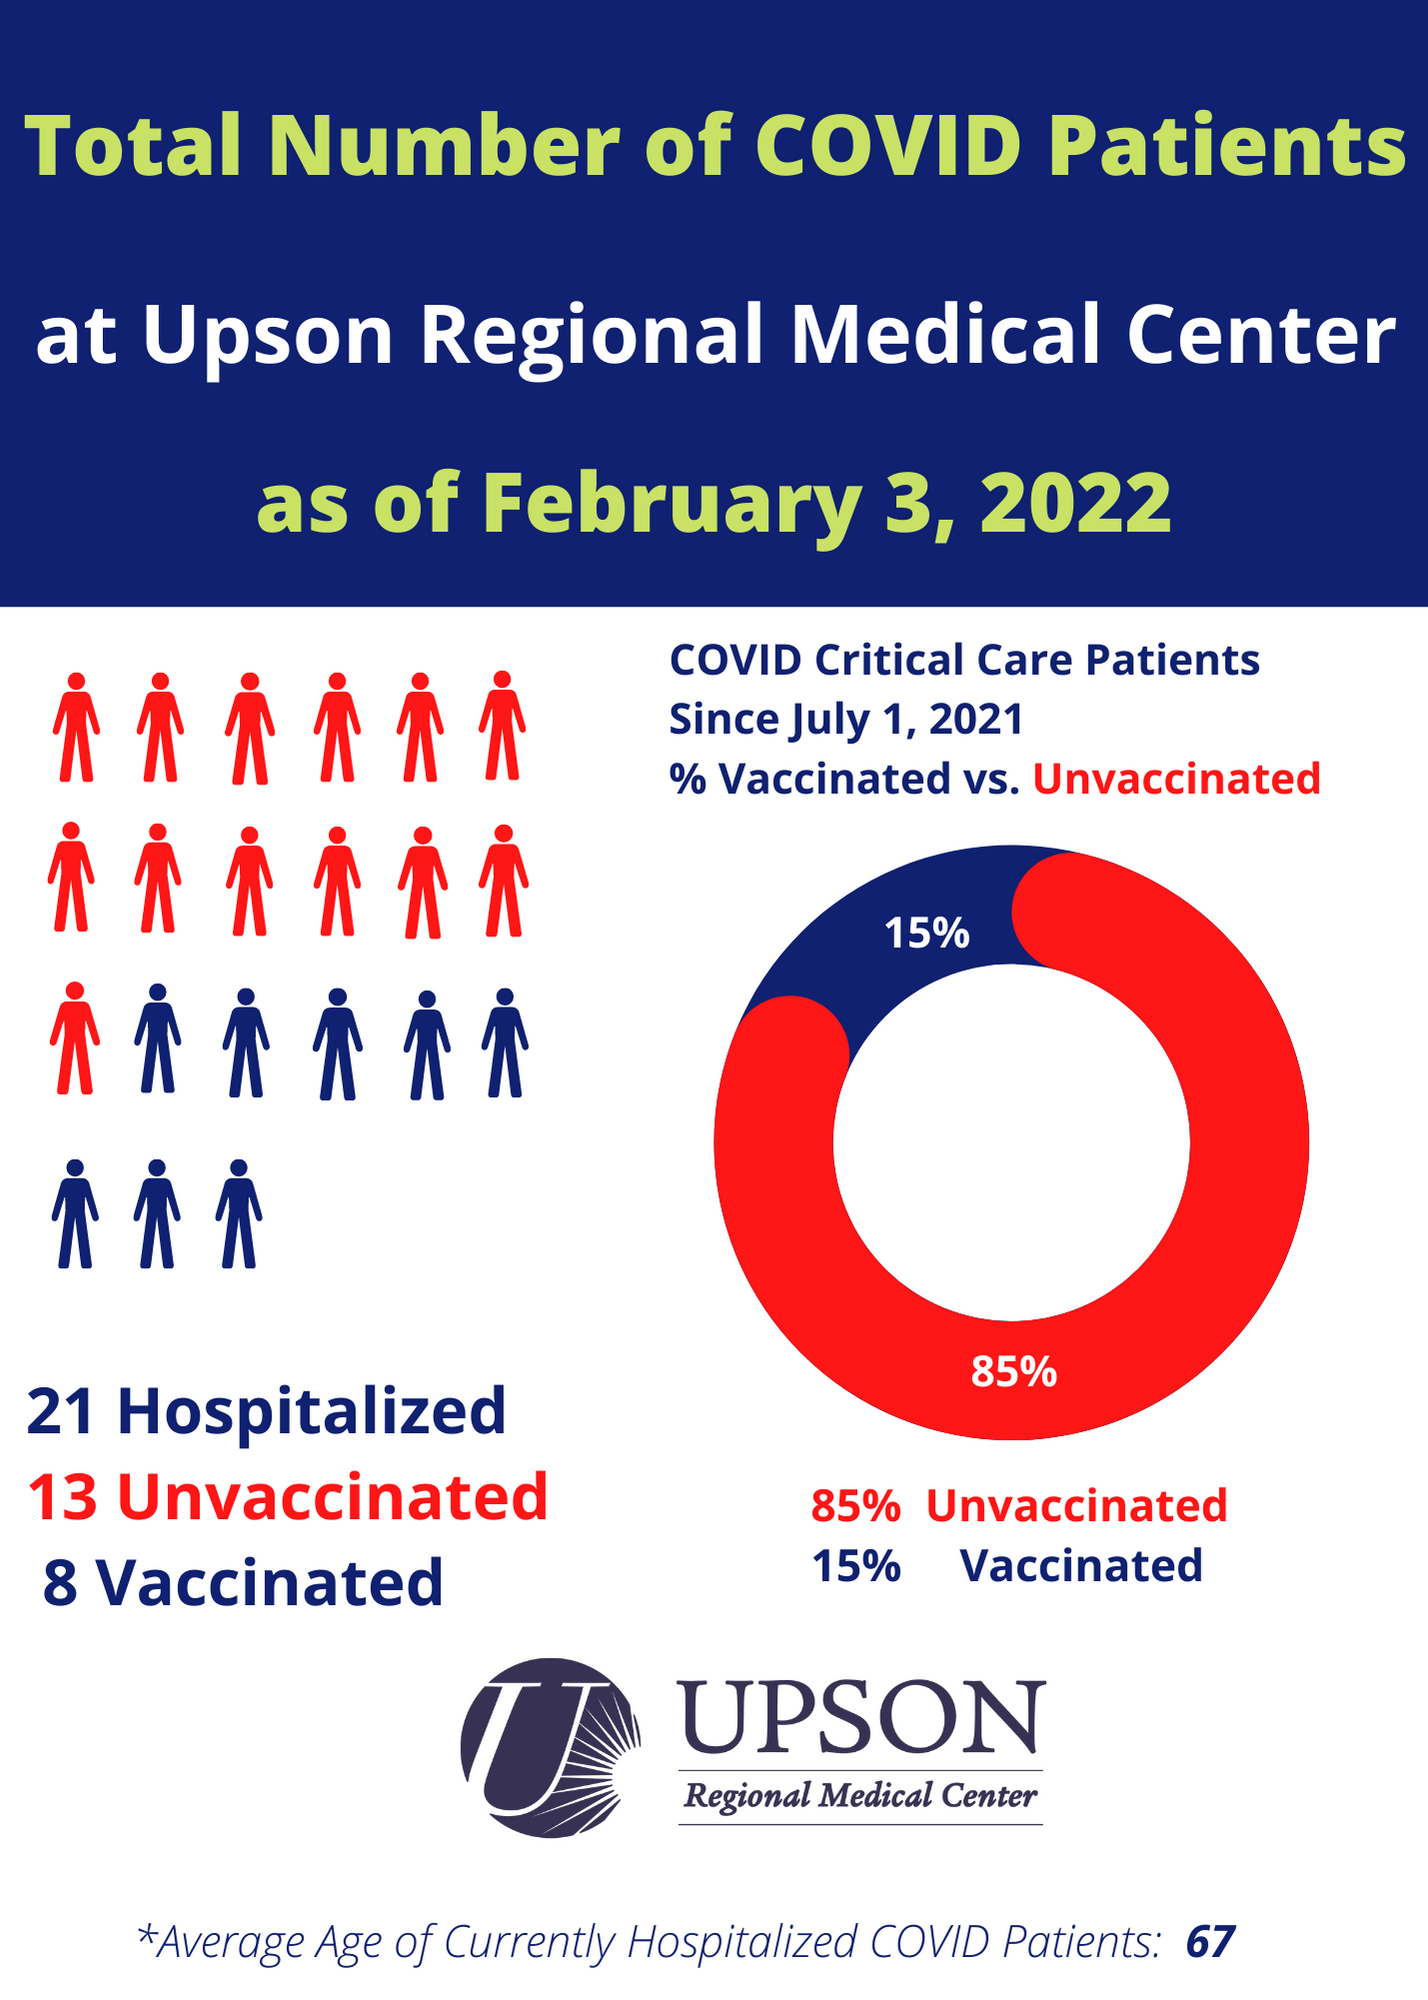 Photo for COVID patients at URMC as of February 3, 2022